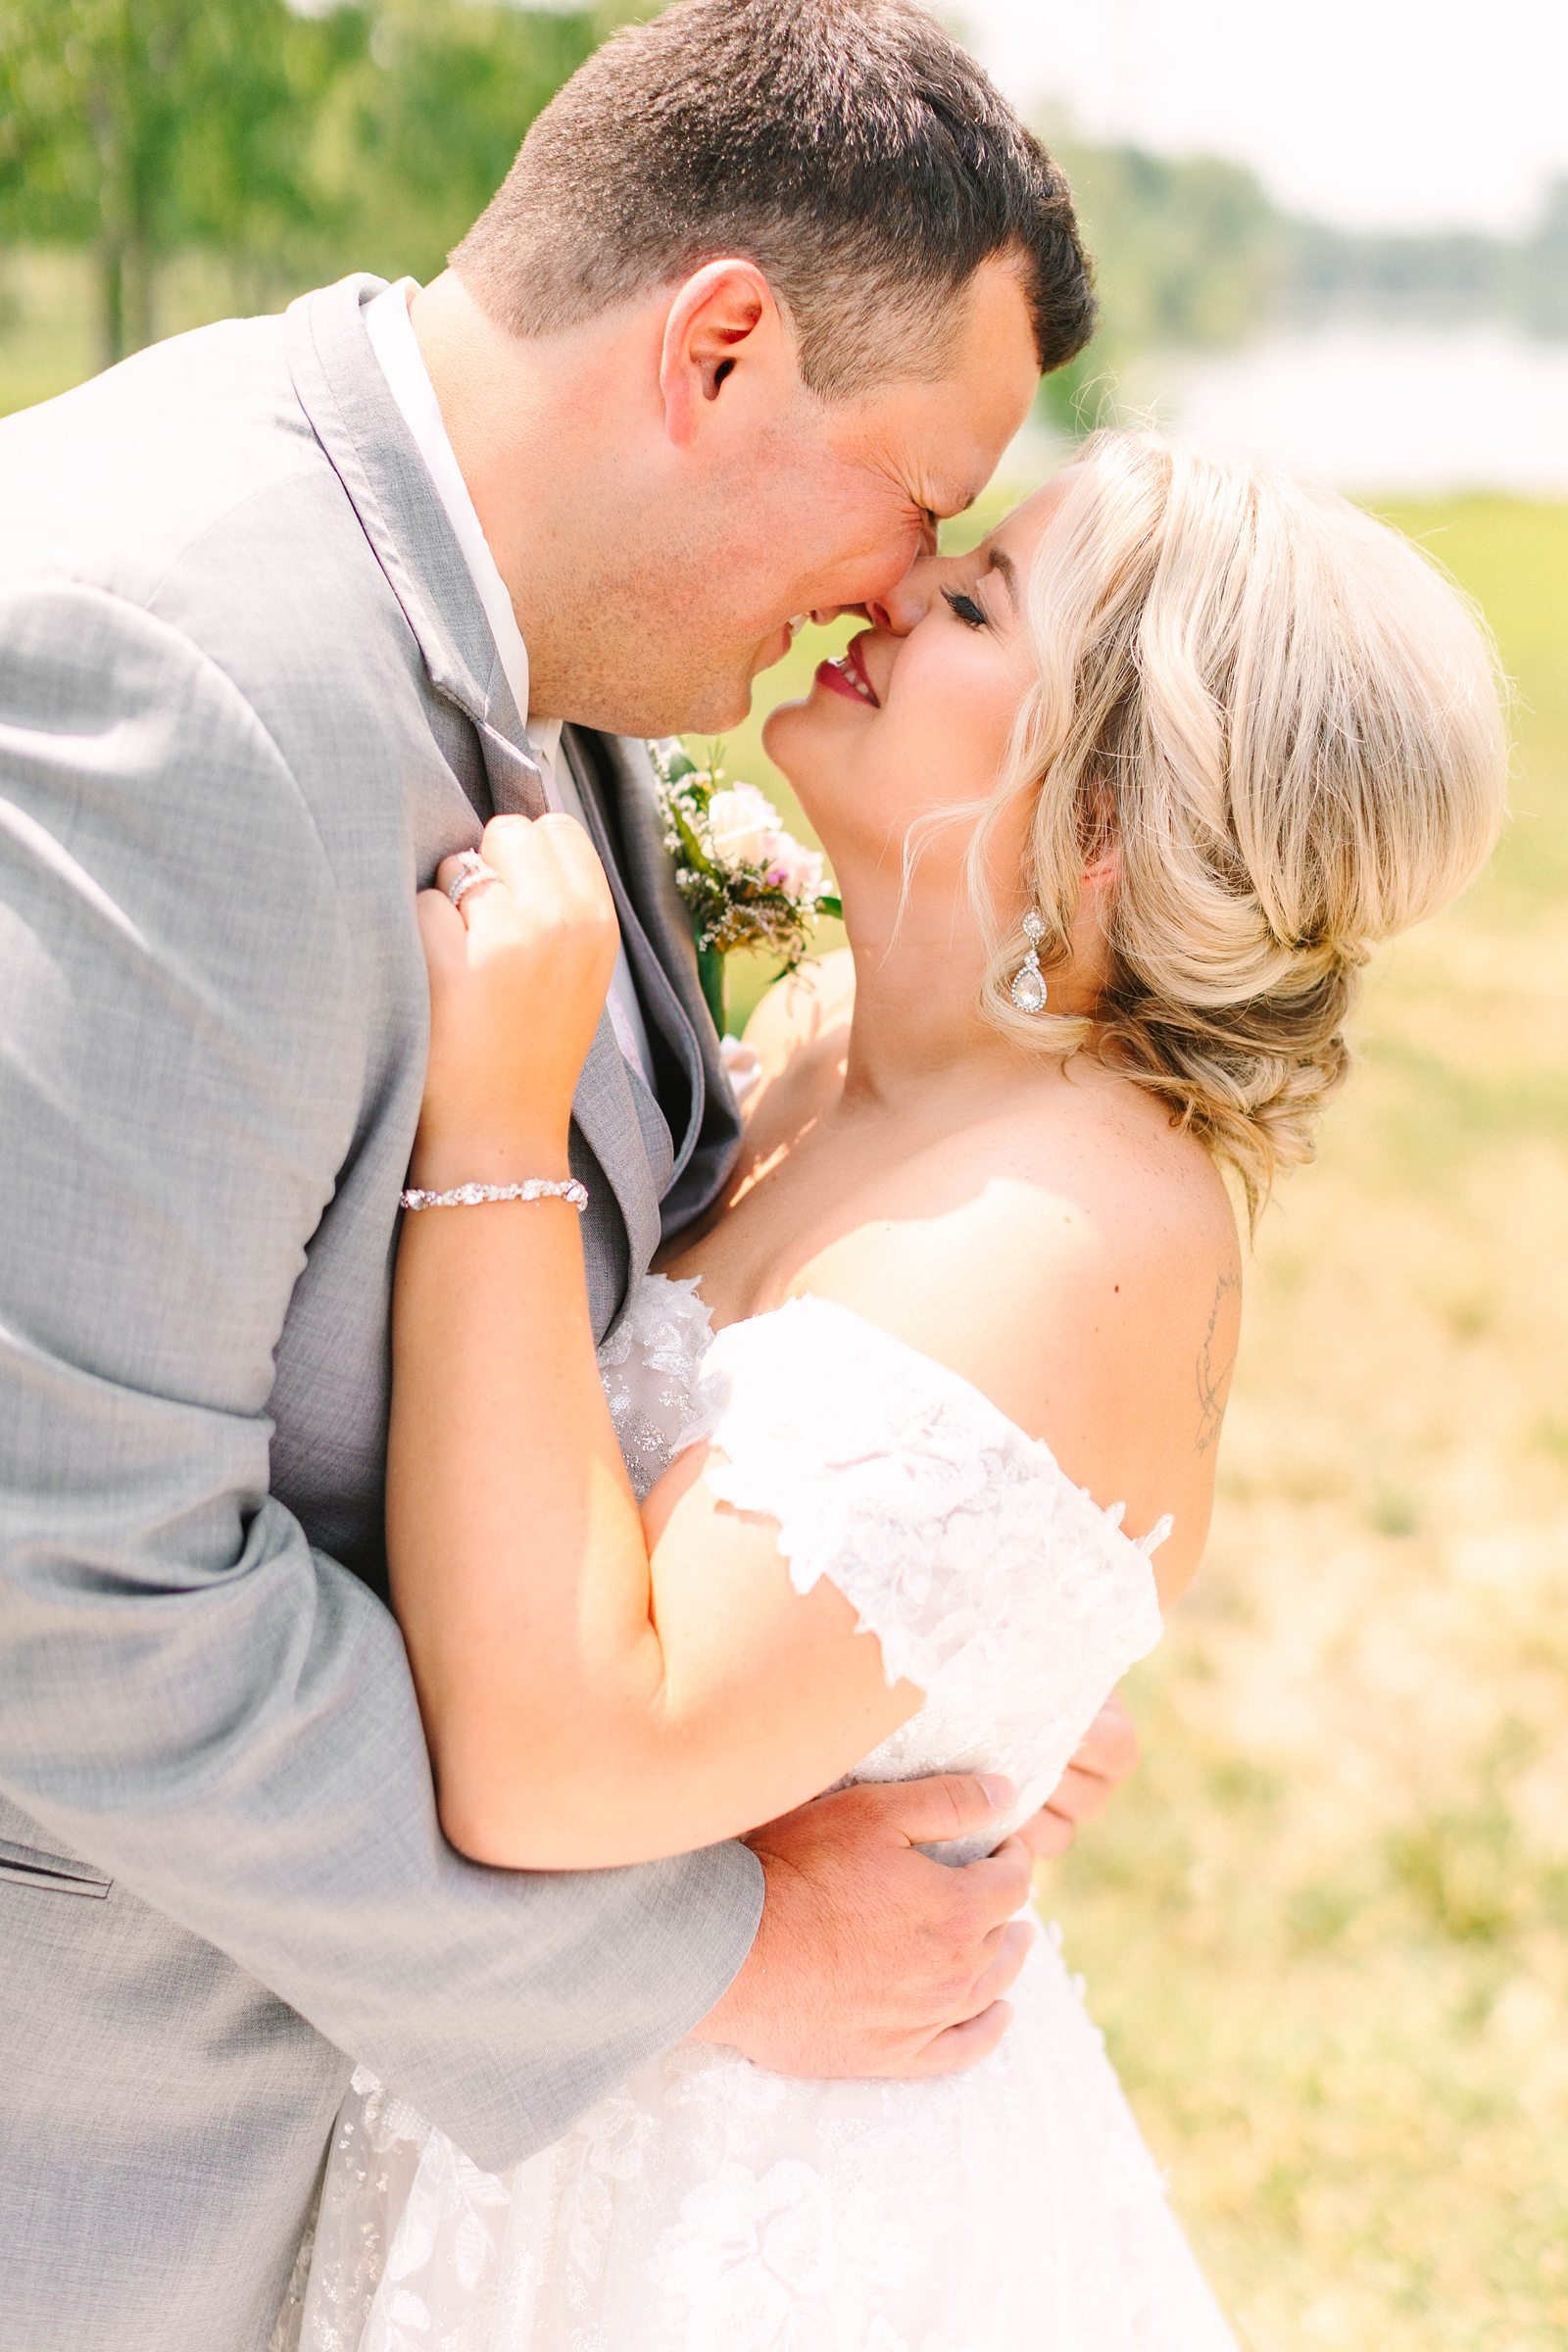 A Sunny Summer Wedding at Friedman Park in Newburgh Indiana | Paige and Dylan | Bret and Brandie Photography089.jpg